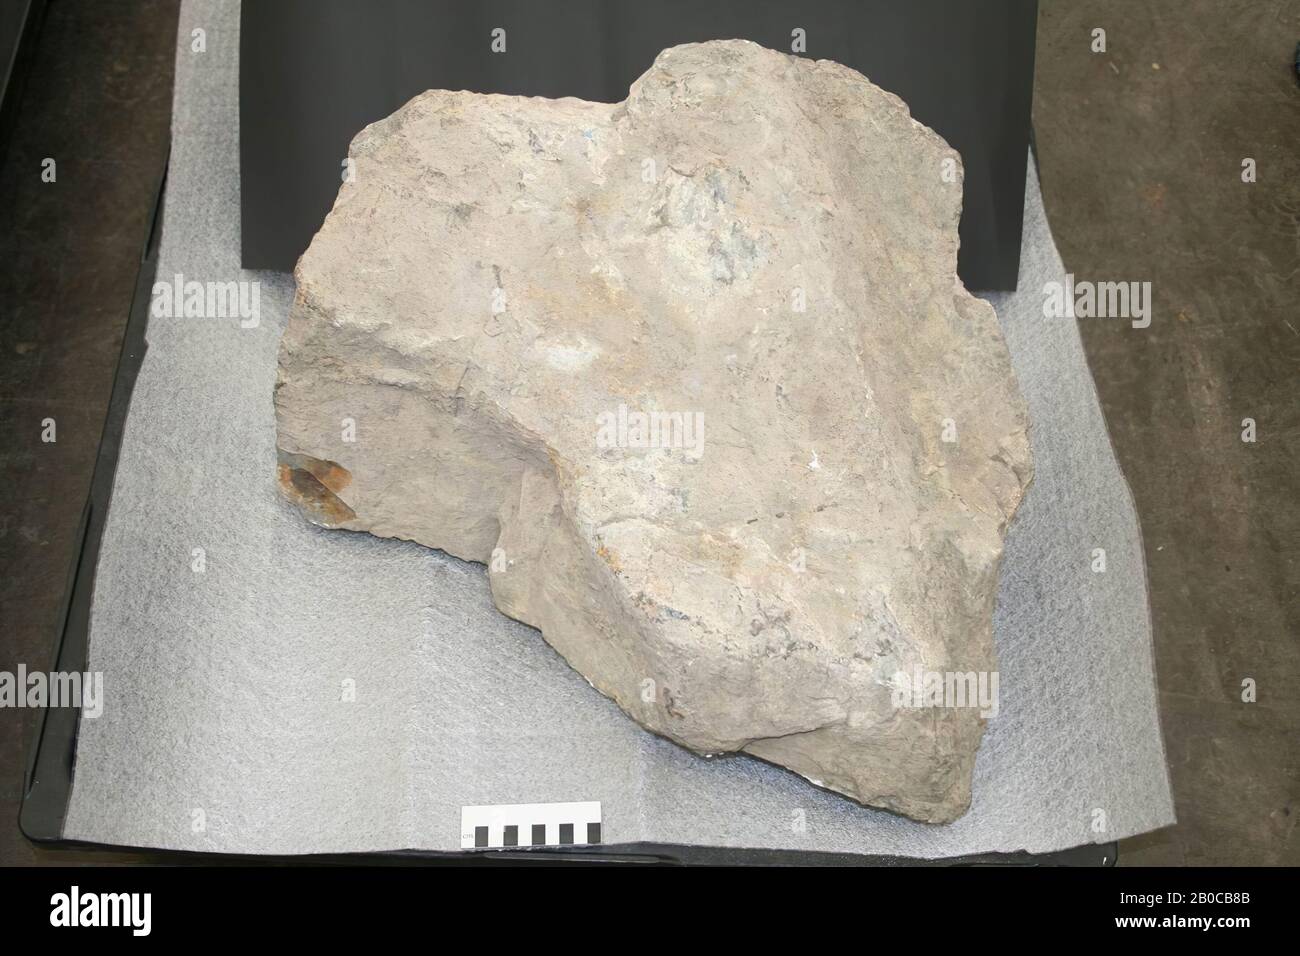 Building fragment of stone, irregularly shaped., Building fragment, stone, 52 x 53 x 30 cm, 83 kg, Netherlands, unknown, unknown, unknown Stock Photo